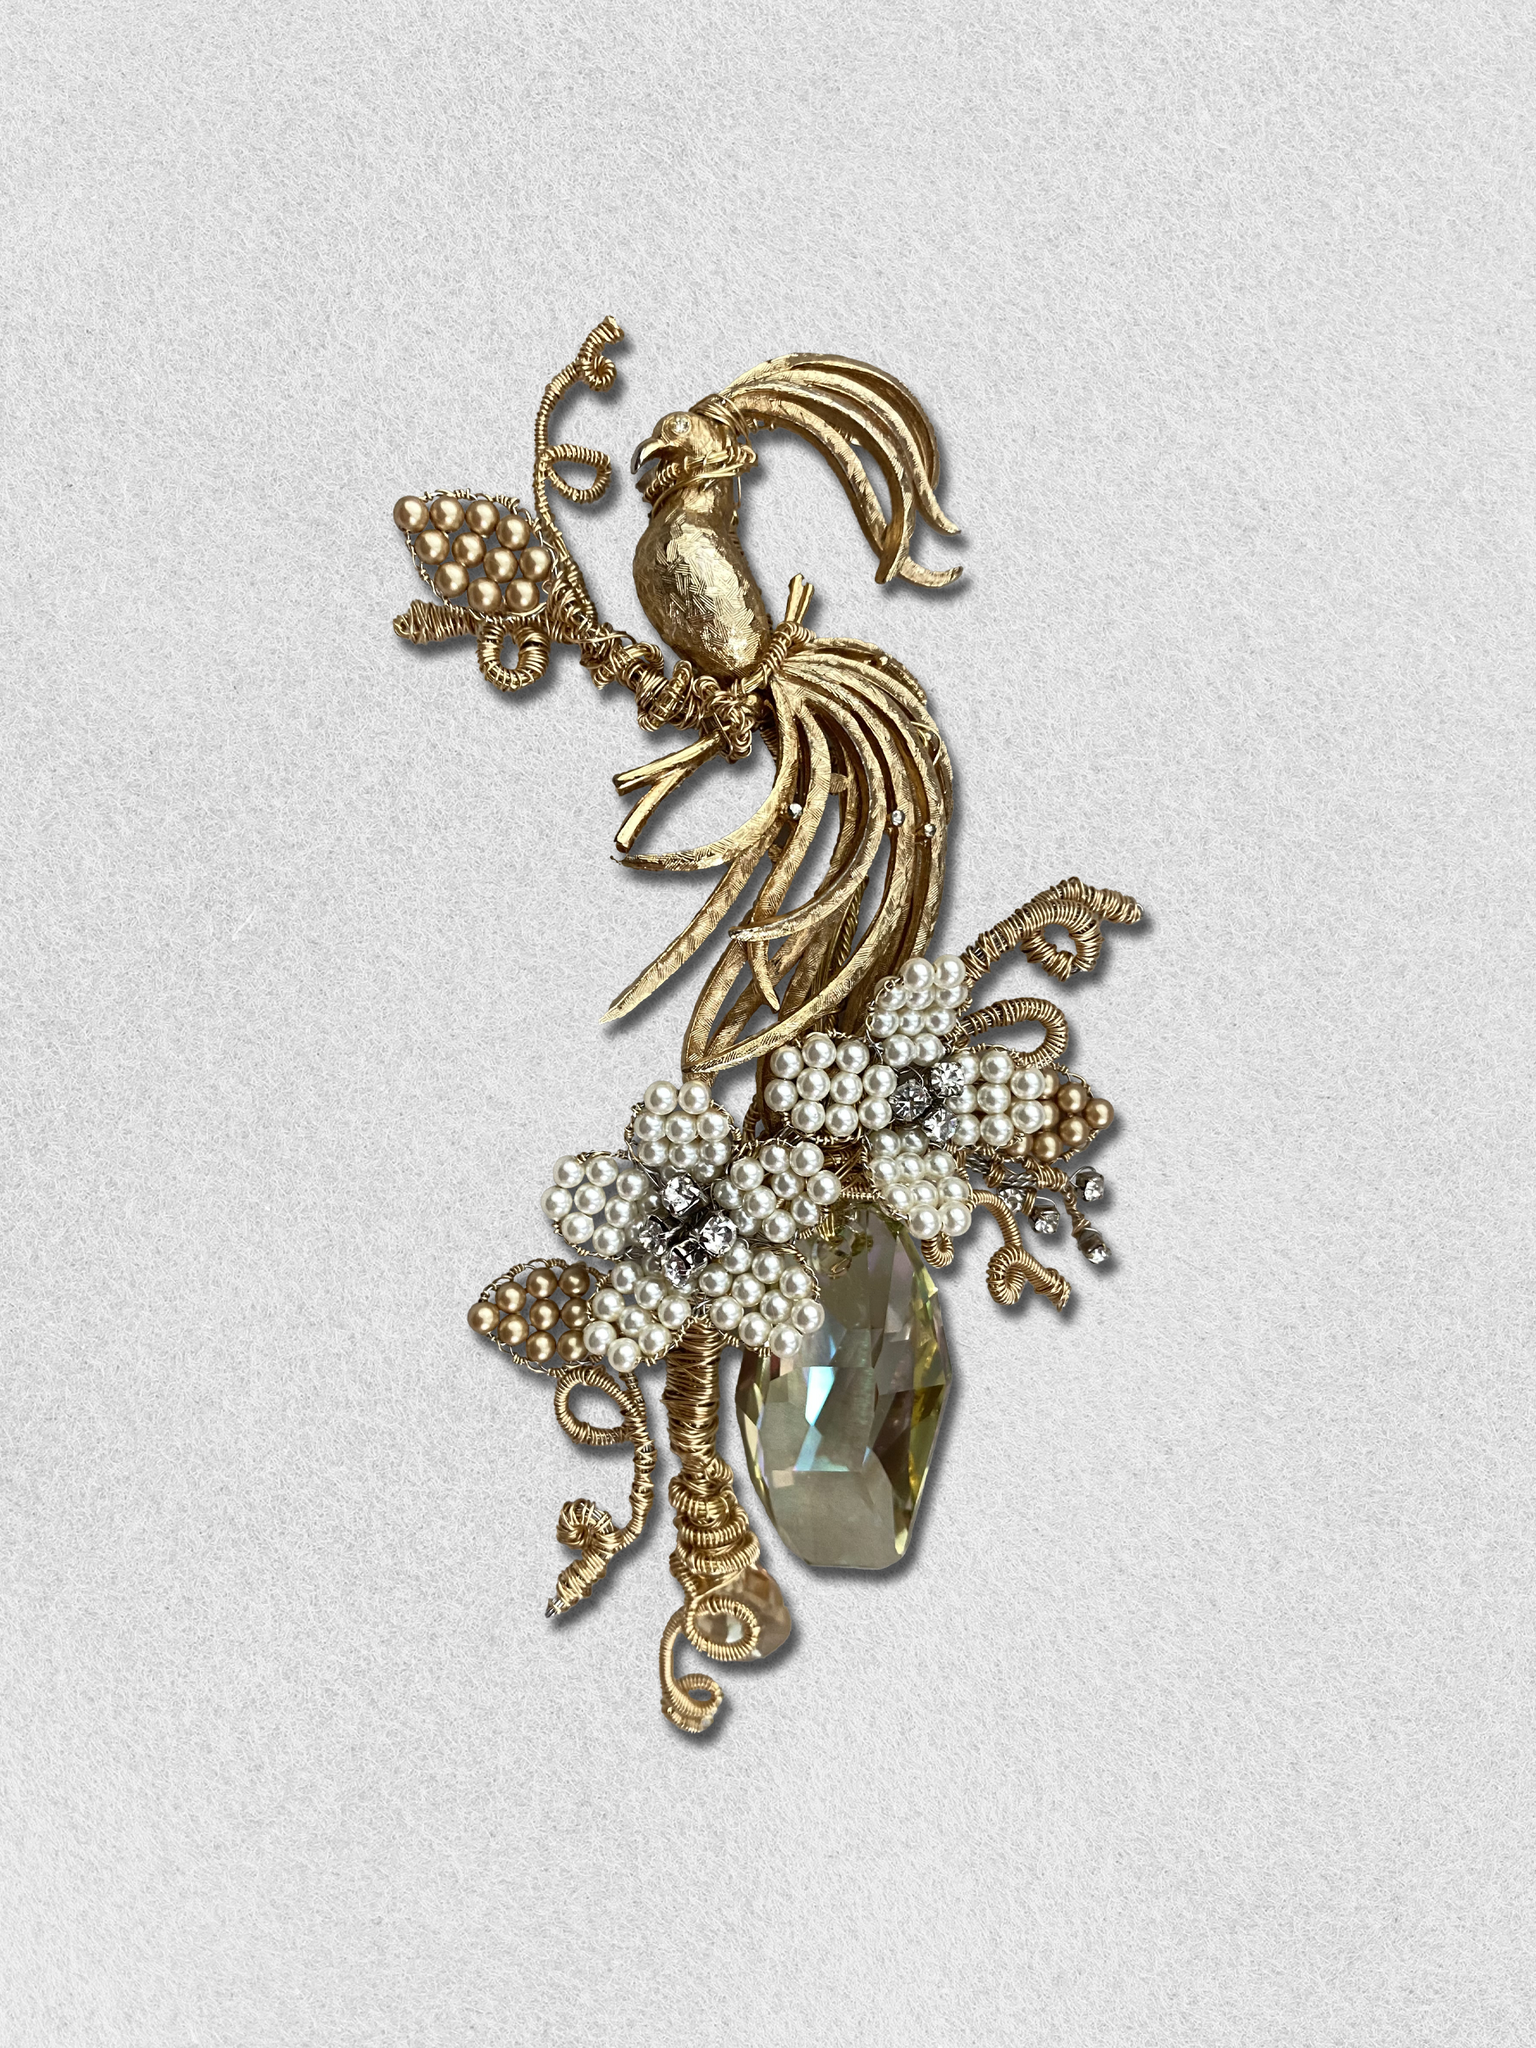 Men's Lapel Pin - The Pearly Peacock